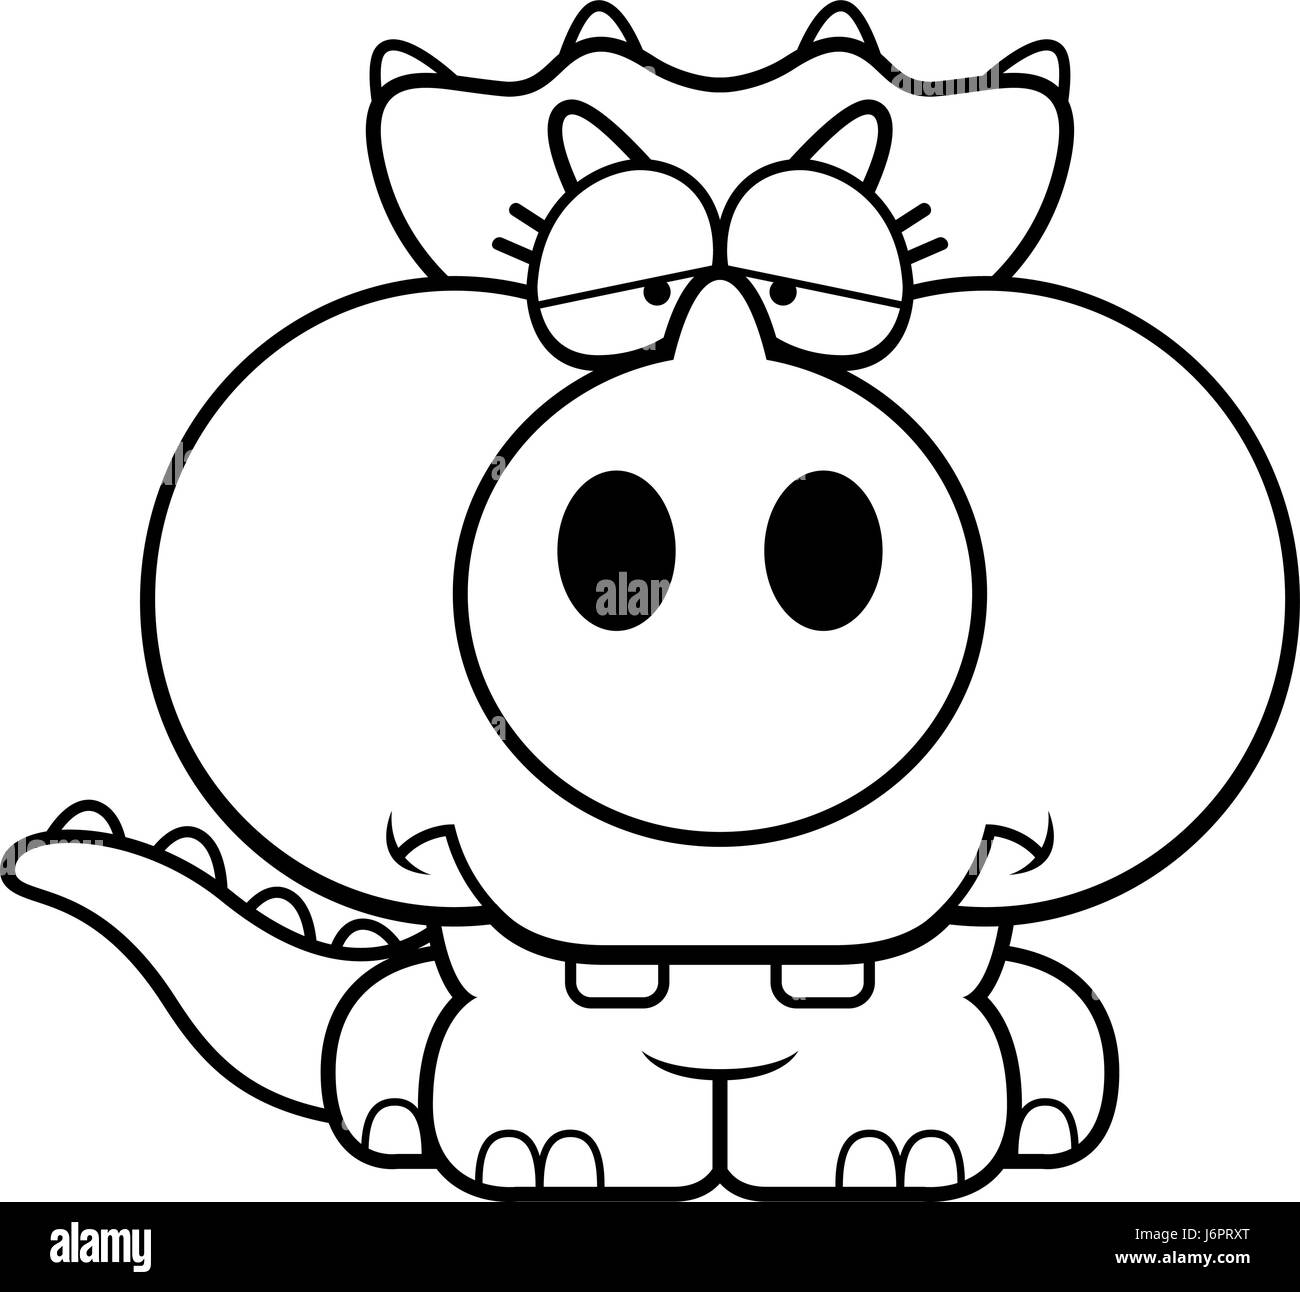 A cartoon illustration of a little Triceratops dinosaur with a sad expression. Stock Vector